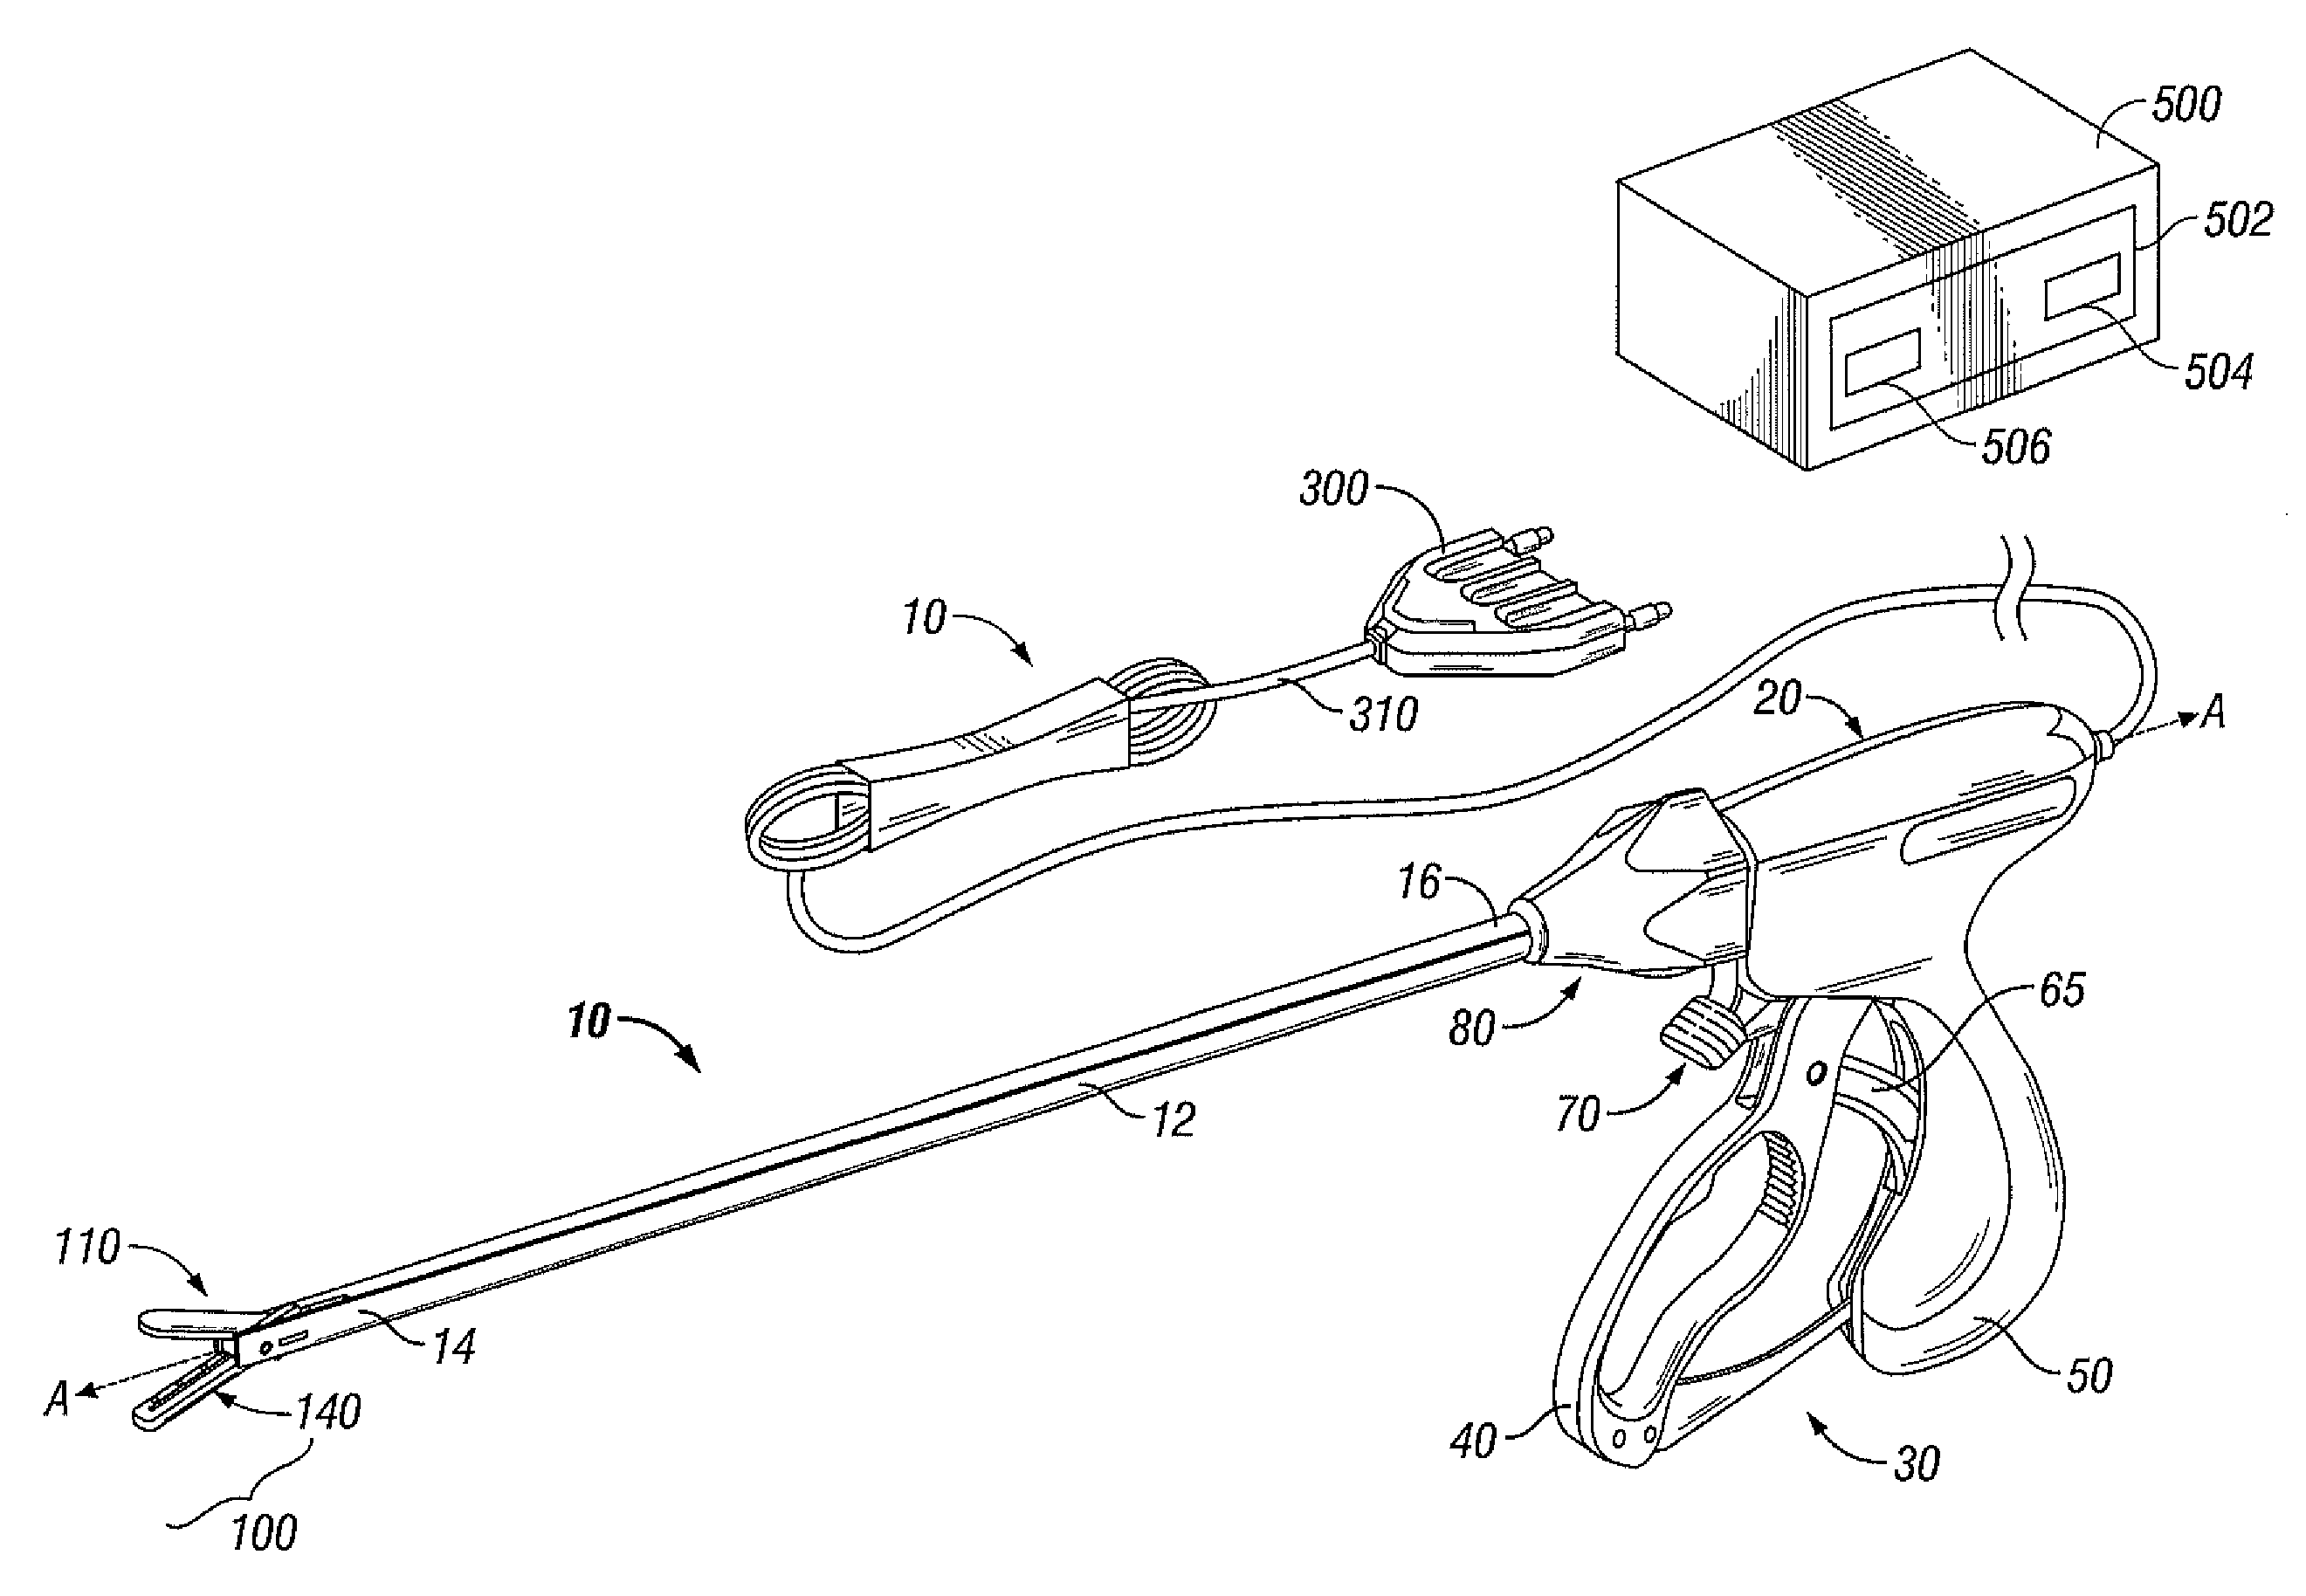 End Effector Assembly for Electrosurgical Devices and System for Using the Same